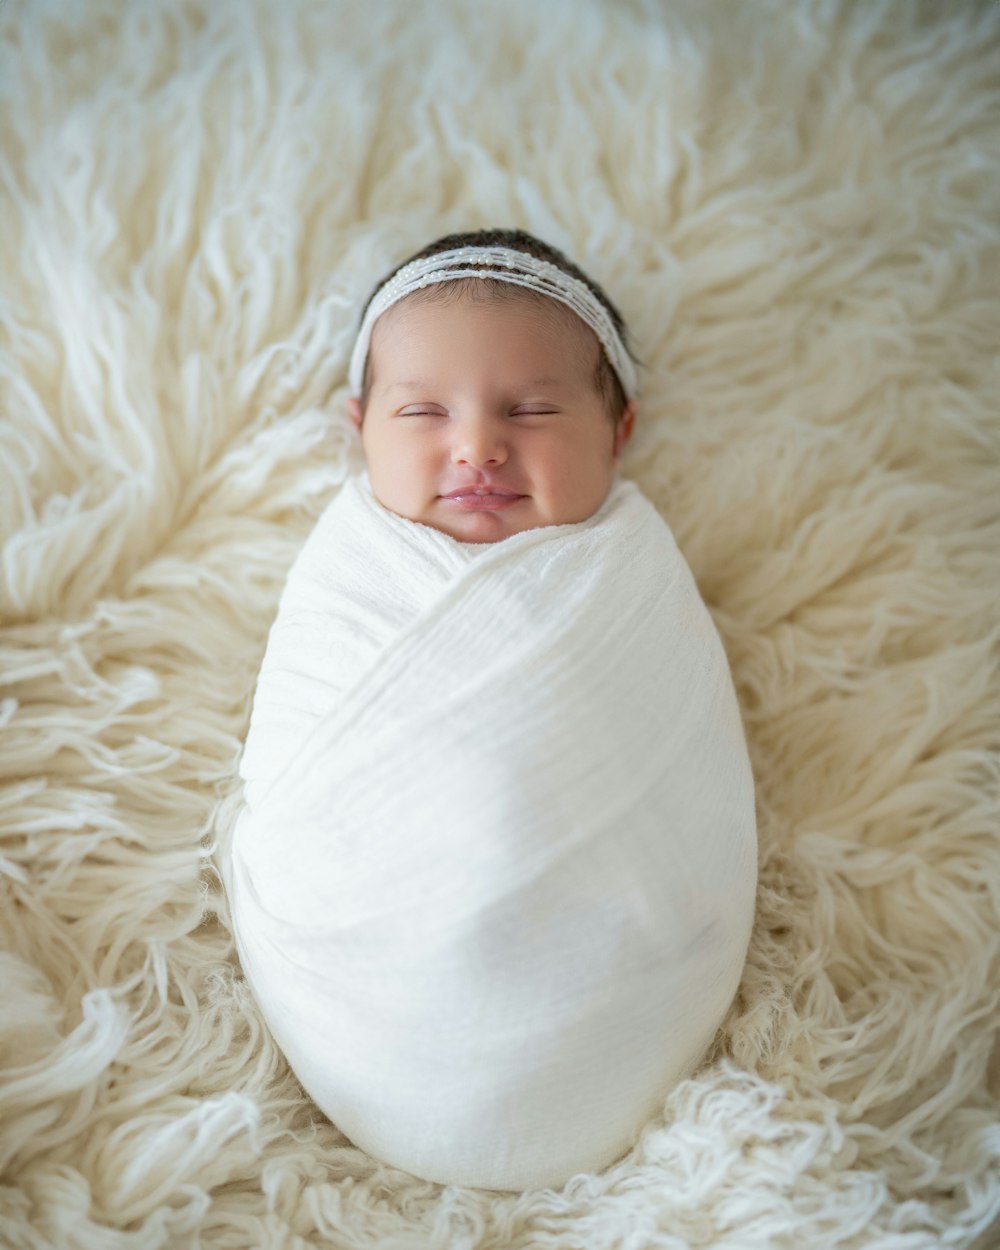 a newborn baby wrapped in a white blanket